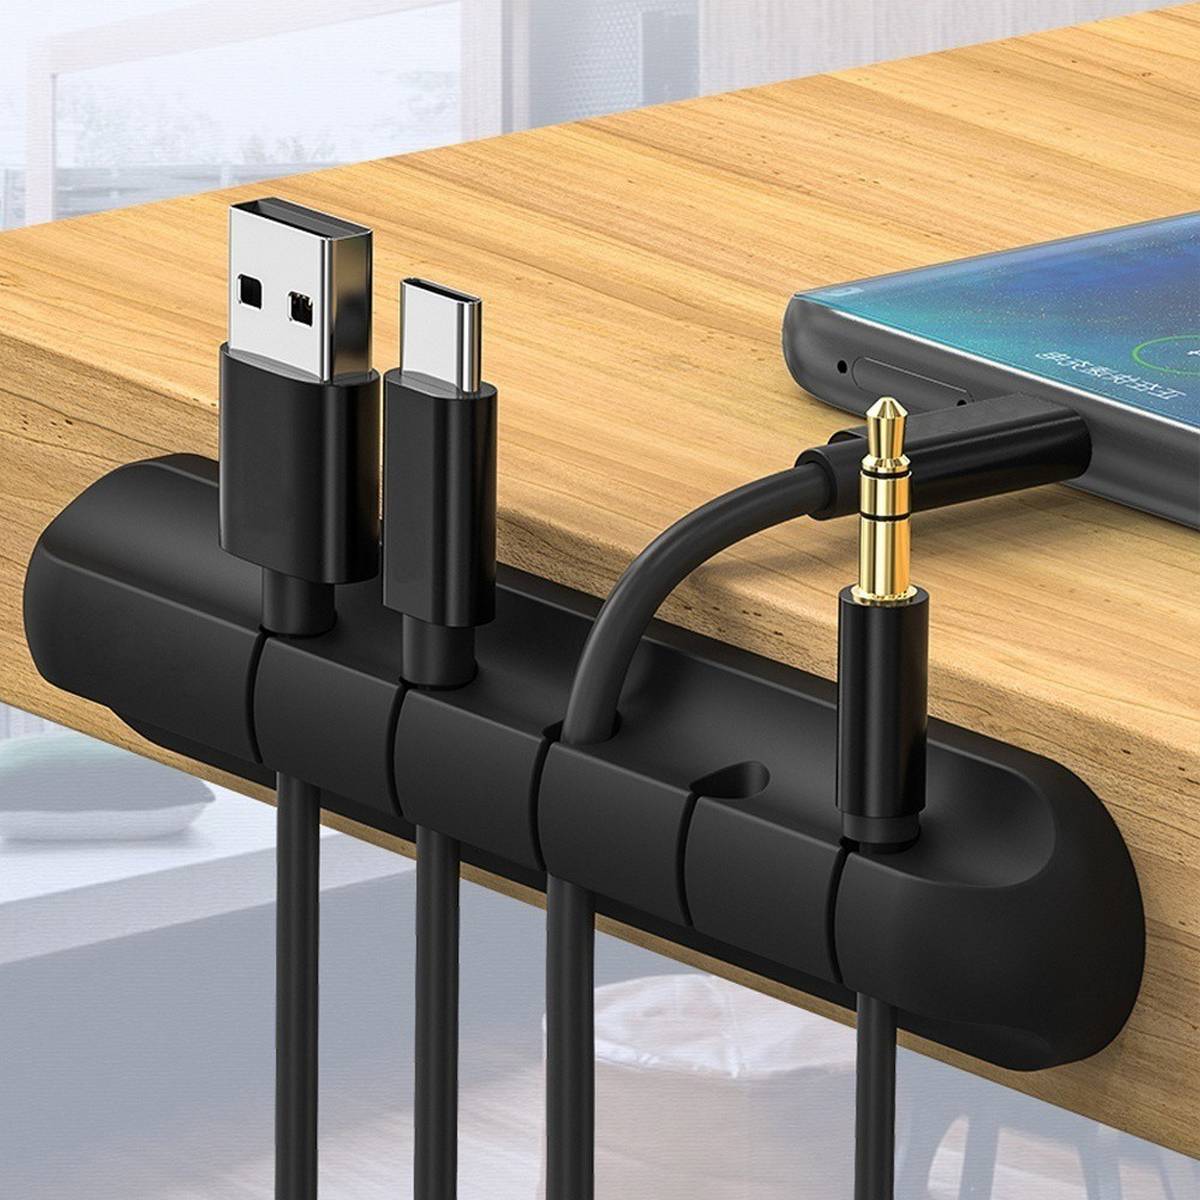 5 Holes Cable Organizer Silicone USB Cable Winder Desktop Tidy Management  Clips Cable Holder for Mouse Headphone Wire